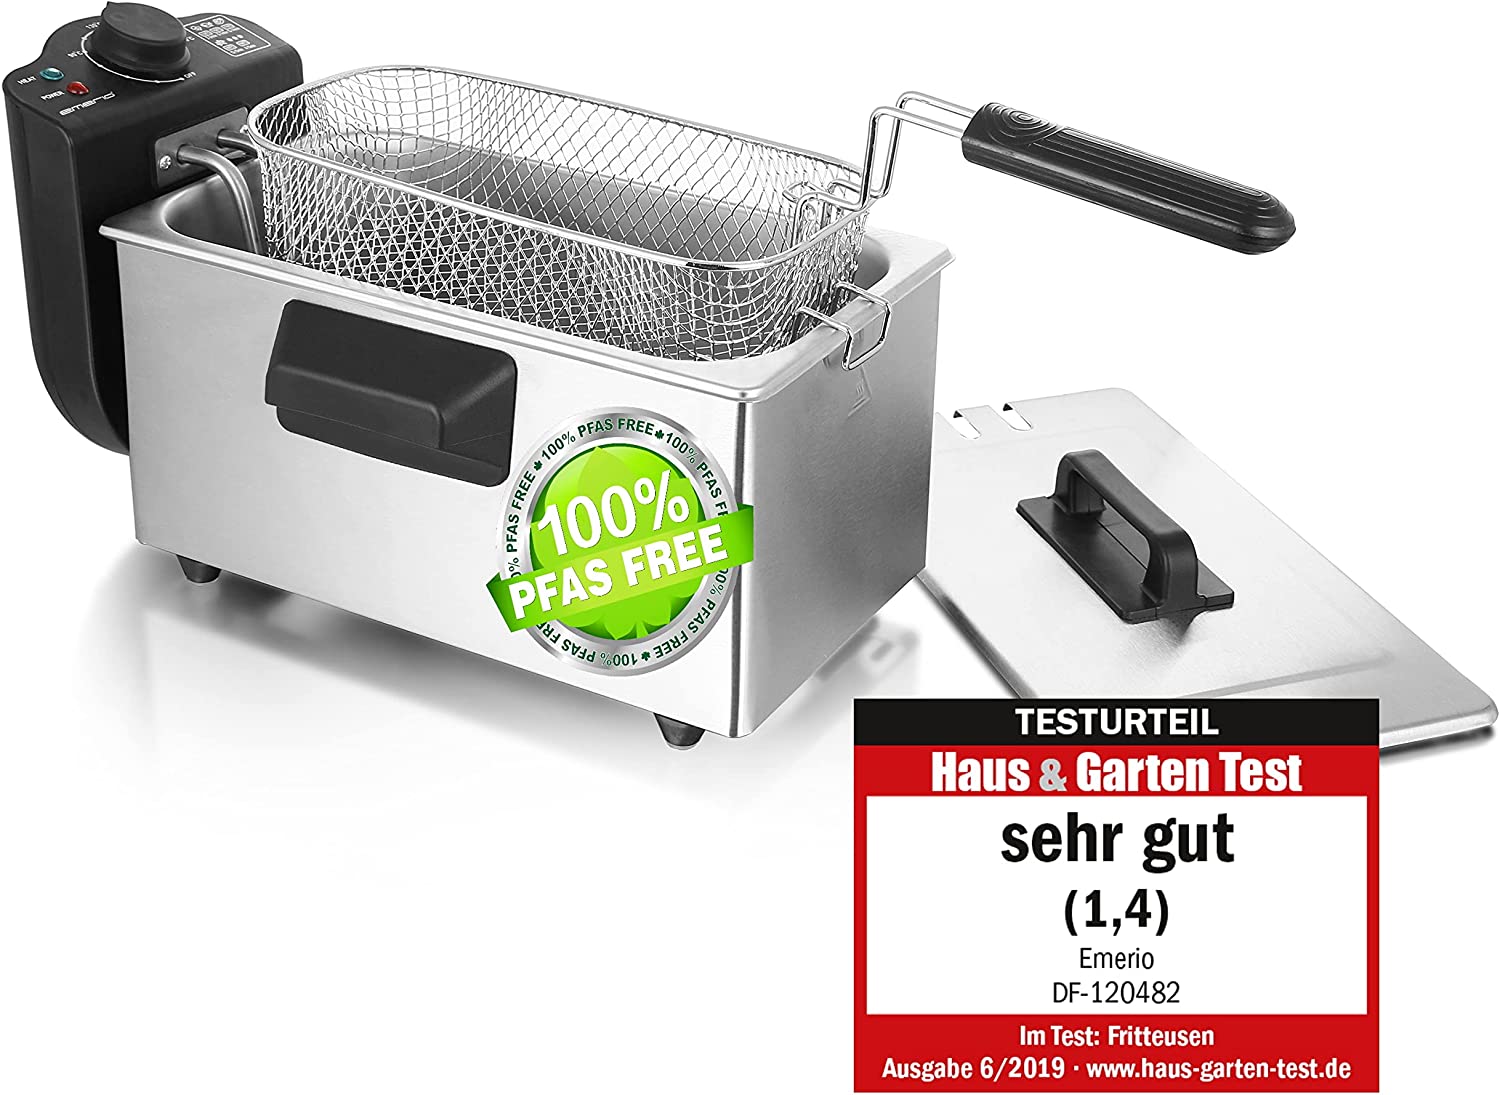 Emerio 3.0 L oil fryer with cold zone technology, \"very good 1.4\" tested by Haus & Garten 06/2019, no more bitter taste, cold zone fryer with 2000 W, stainless steel tank, BPA-free